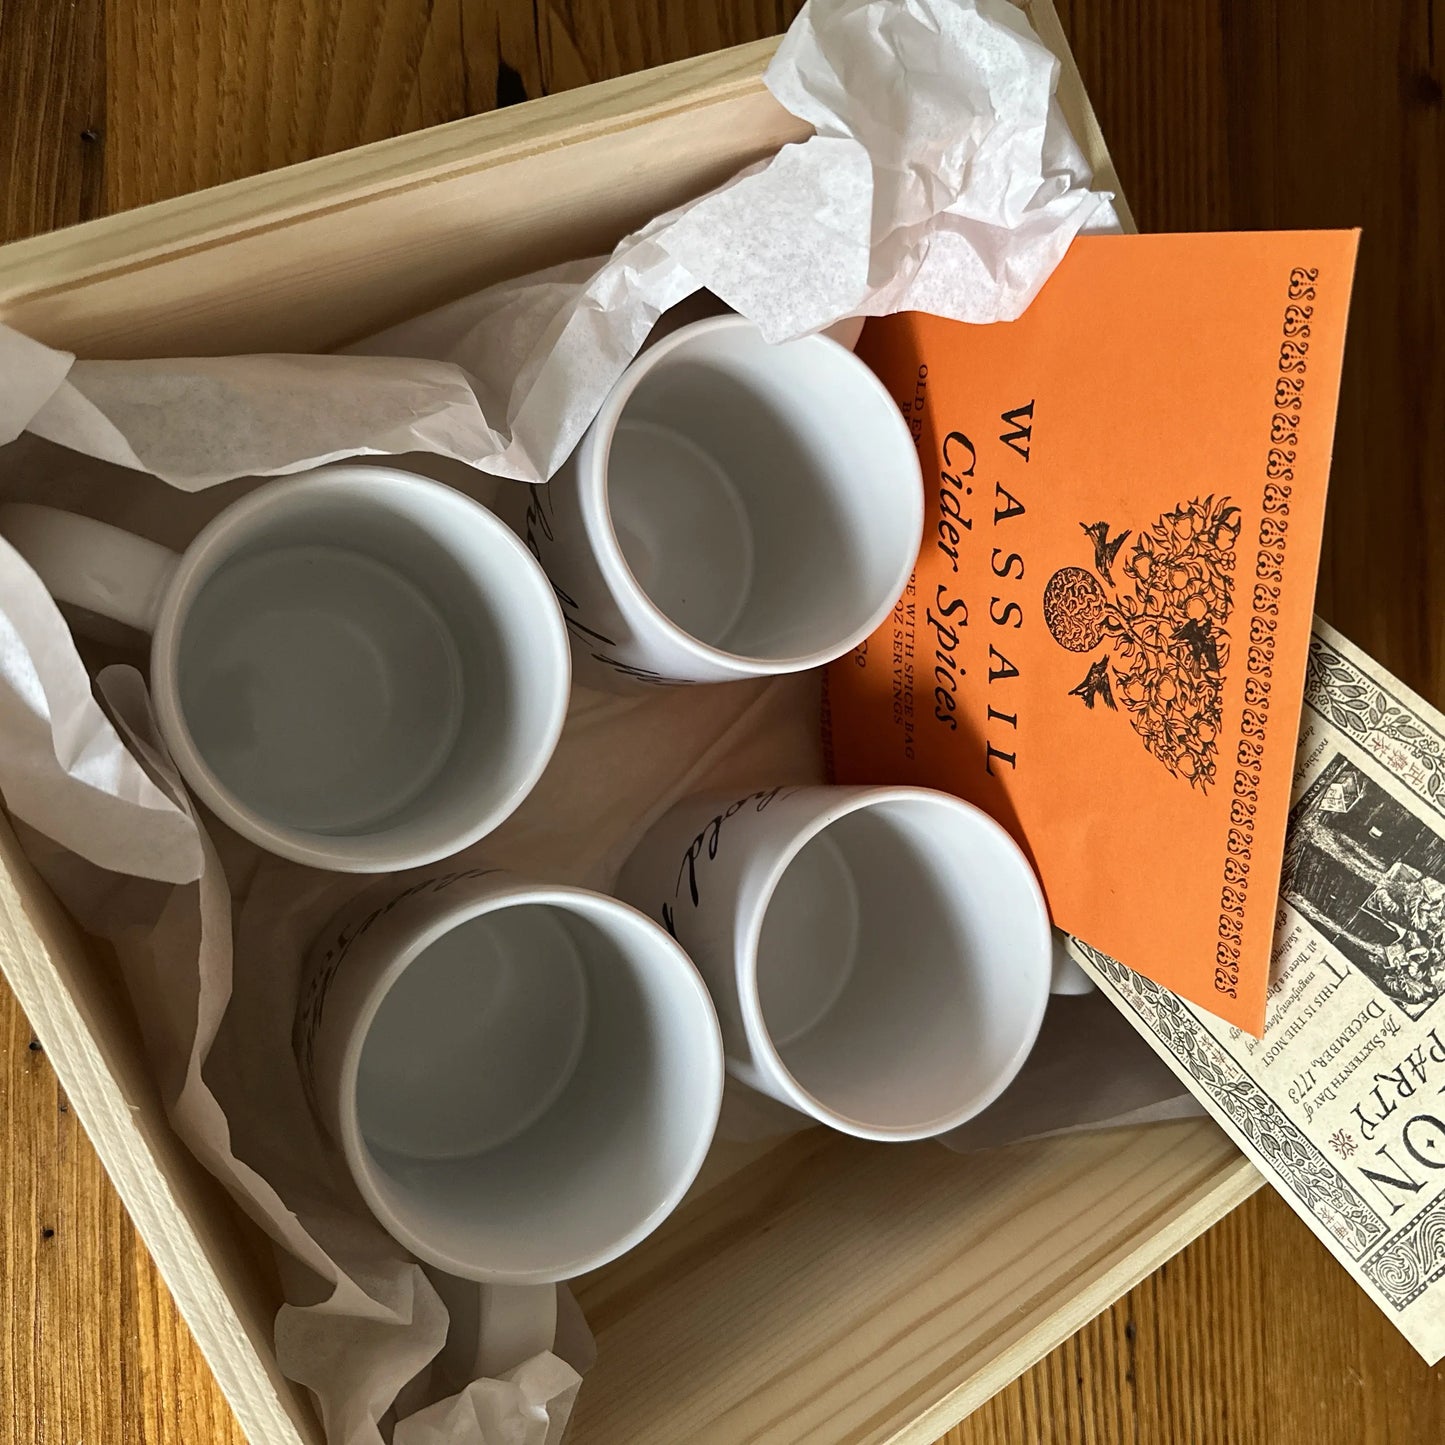 Contents of Boxed set with "We hold these truths - July 4, 1776" Mugs and Wassail Tea from The History List store